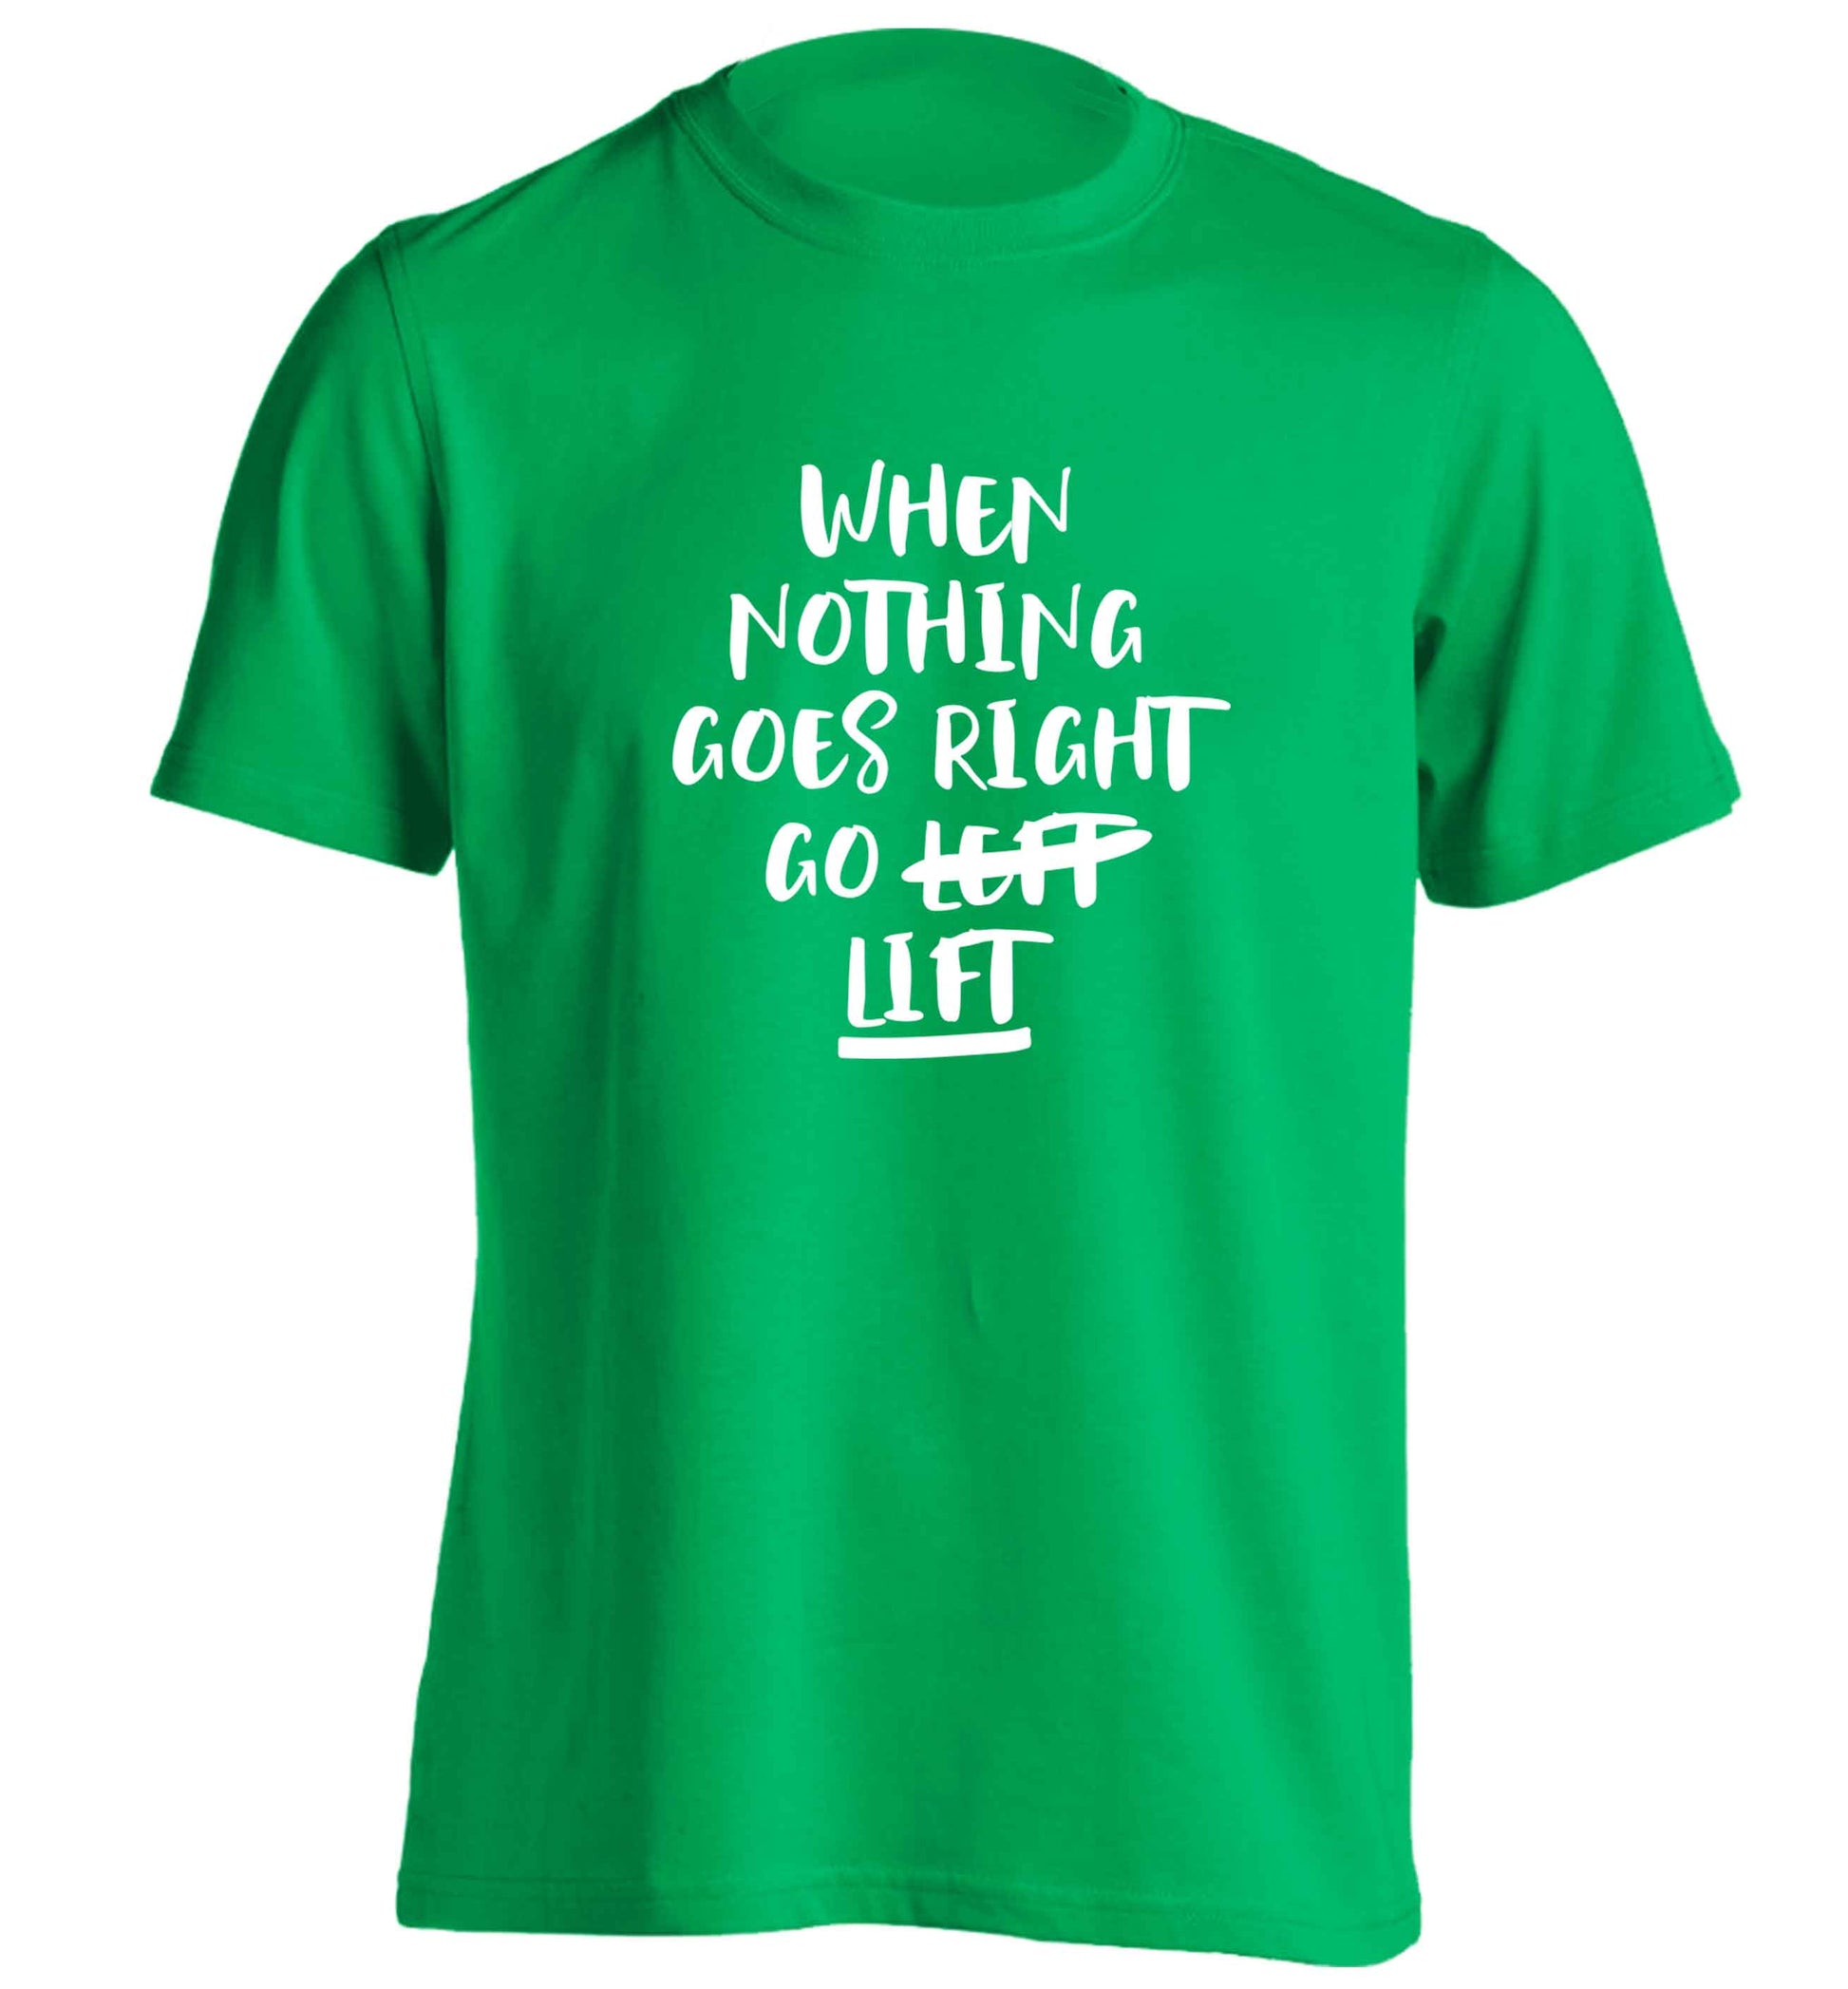 When nothing goes right go lift adults unisex green Tshirt 2XL